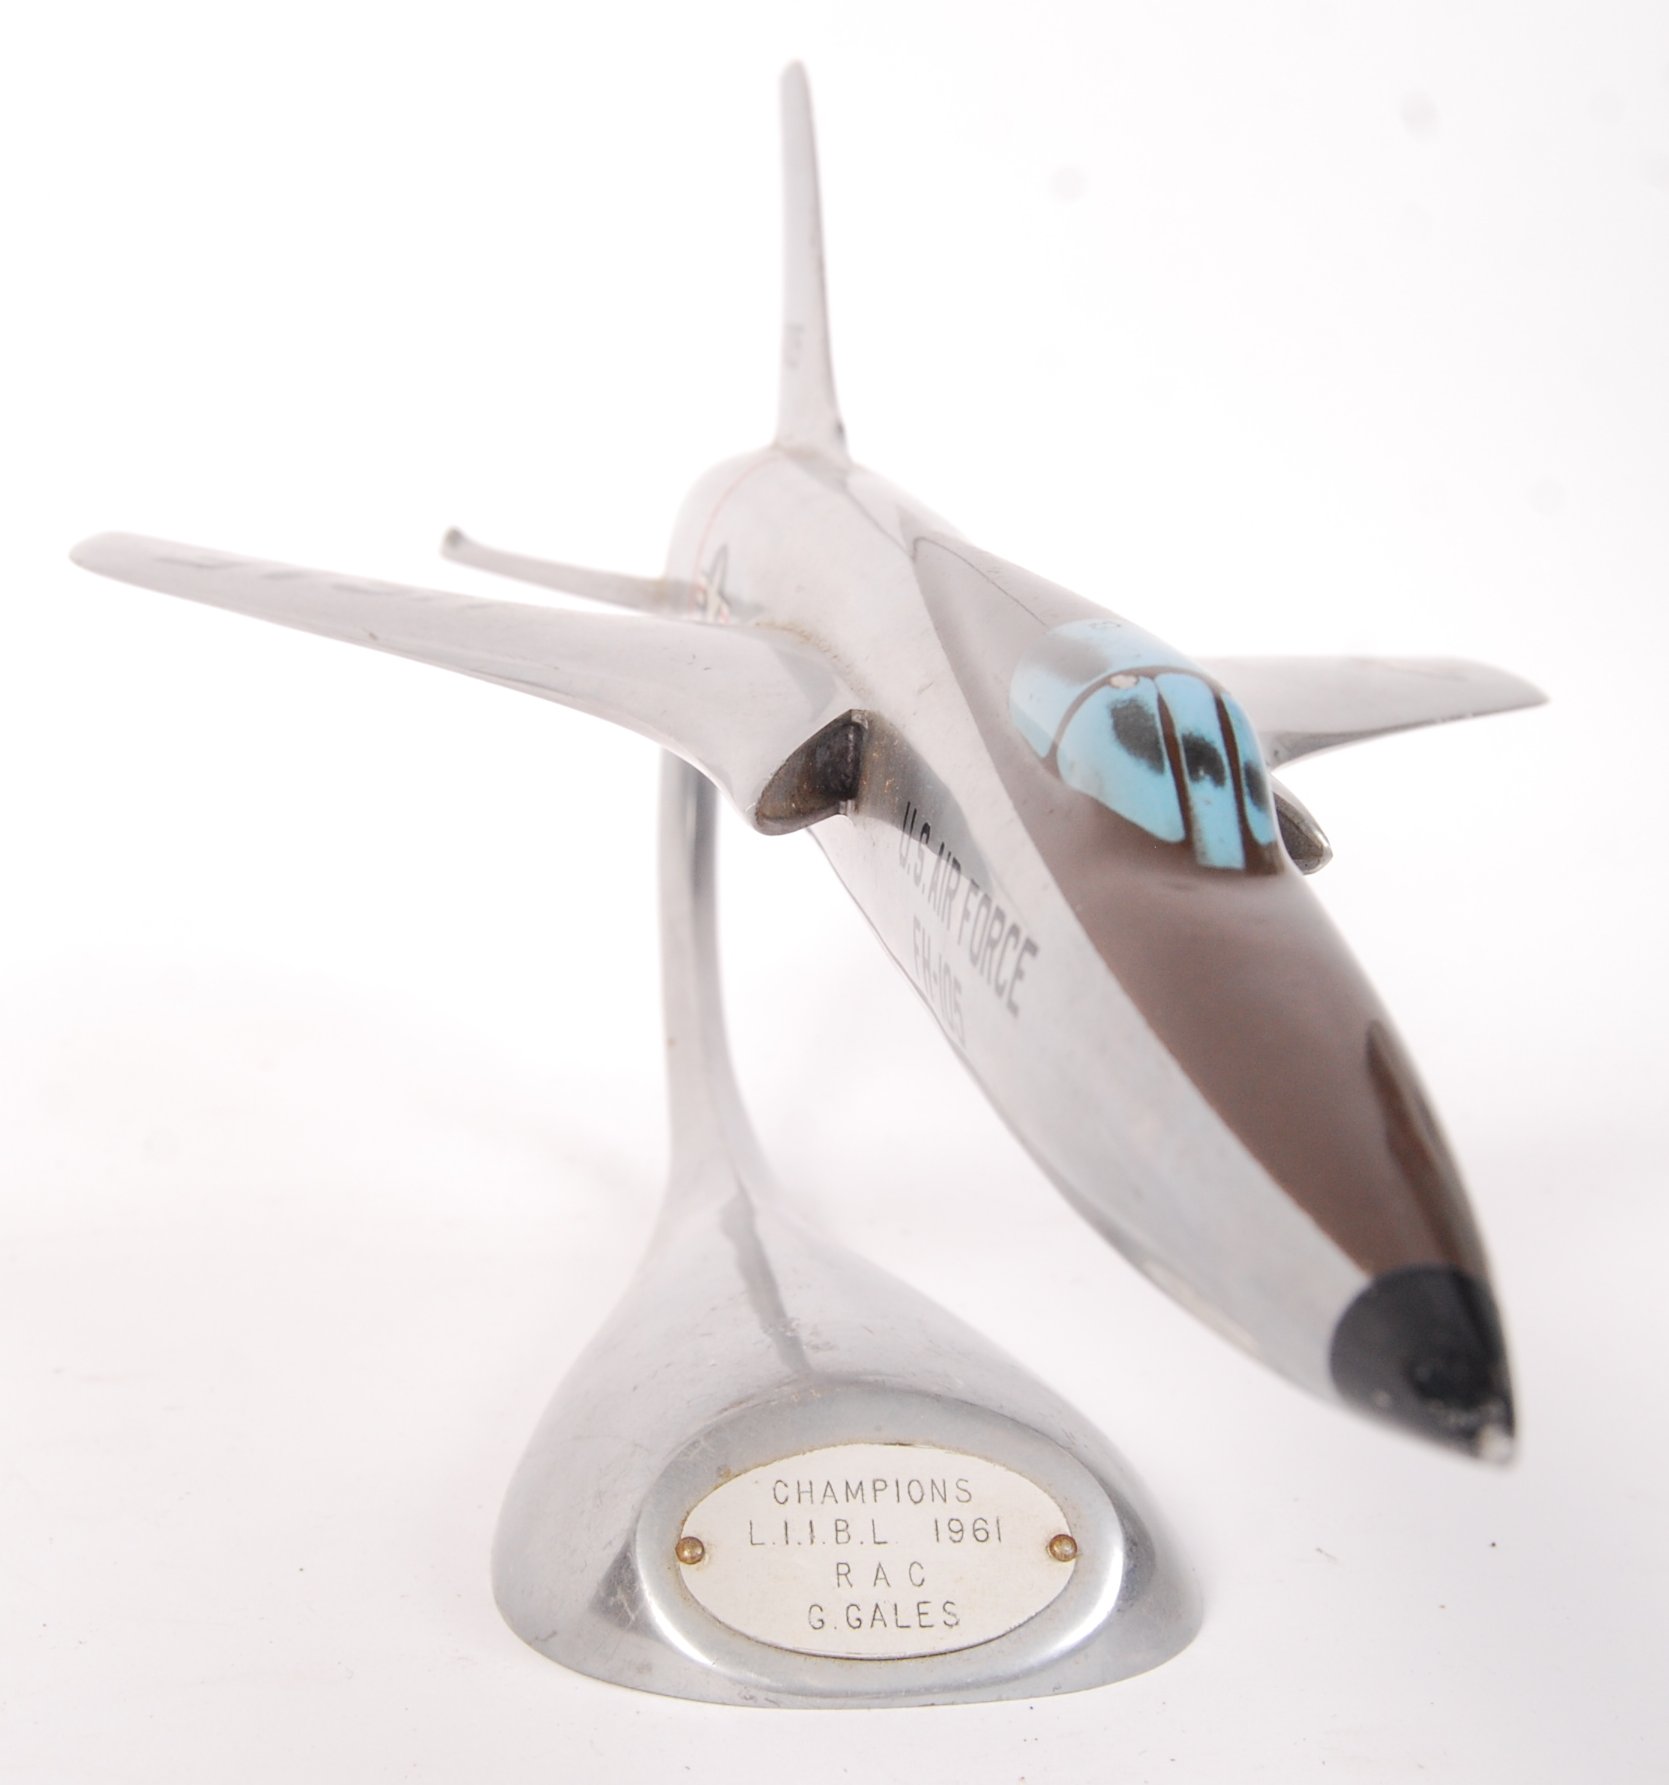 ALUMINIUM SCALE MODEL OF A 40105/FH-105 US AIR FORCE JET - Image 3 of 4